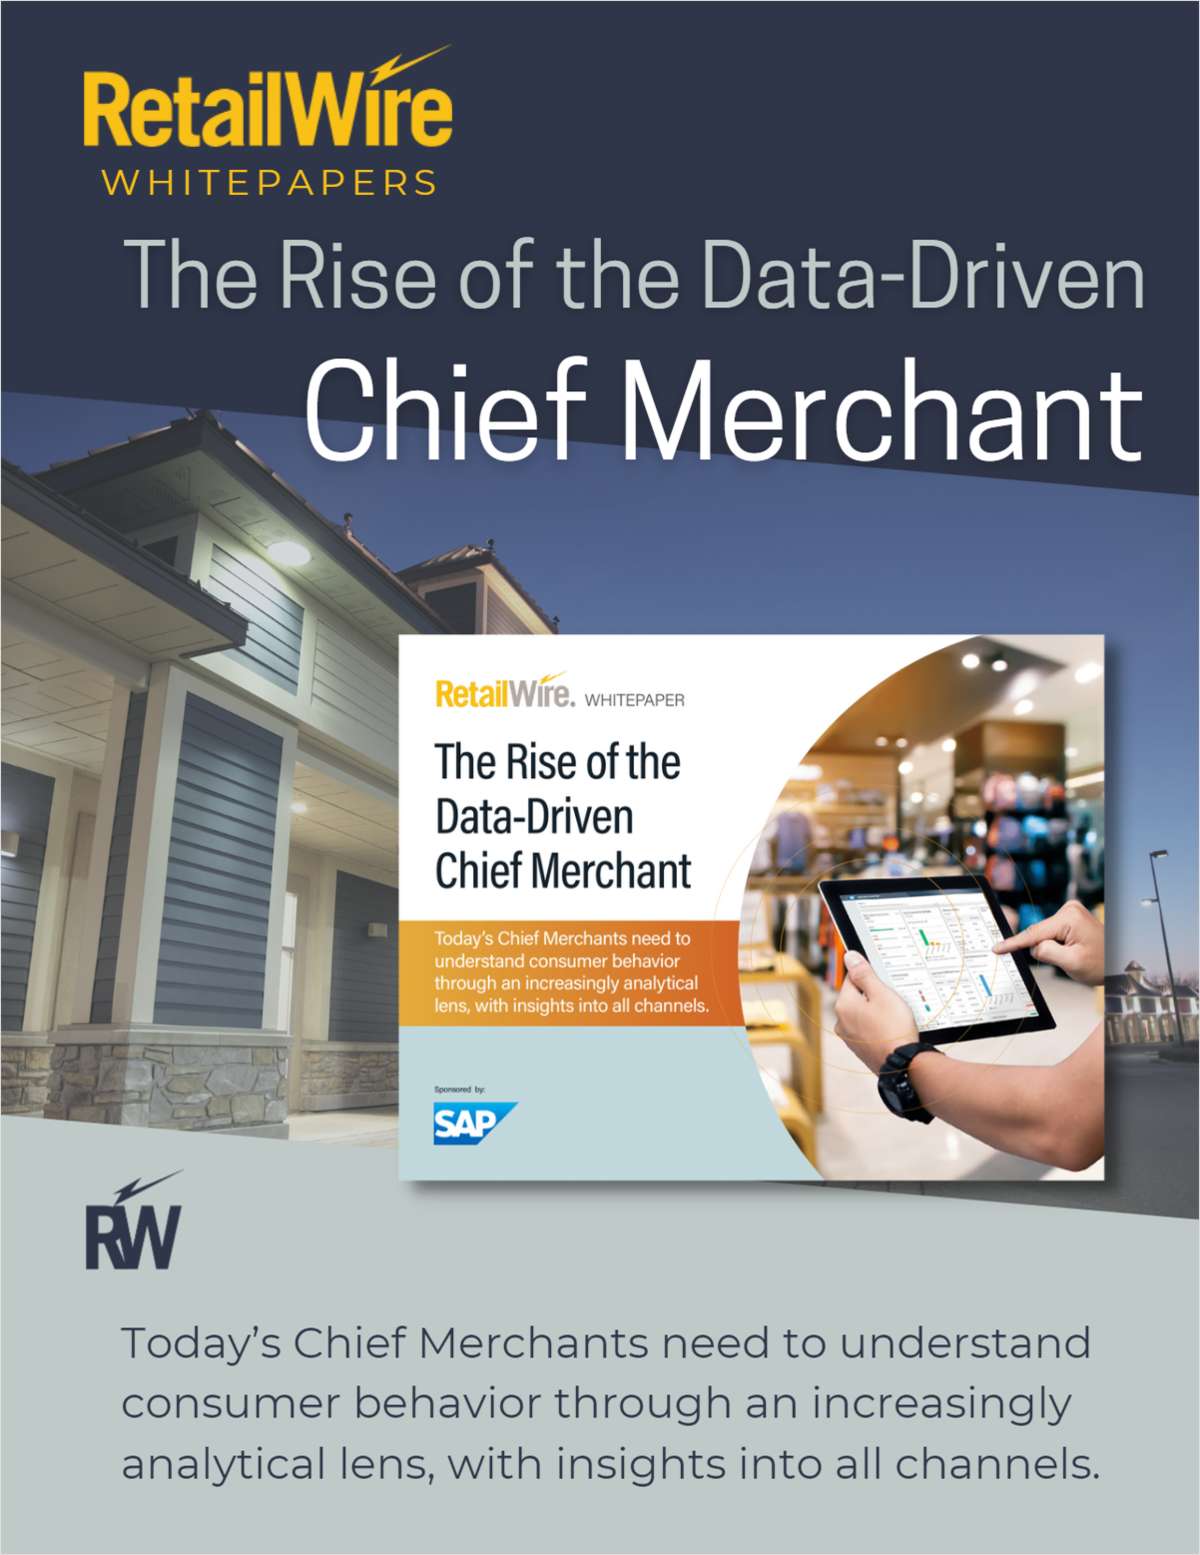 The Rise of the Data-Driven Chief Merchant